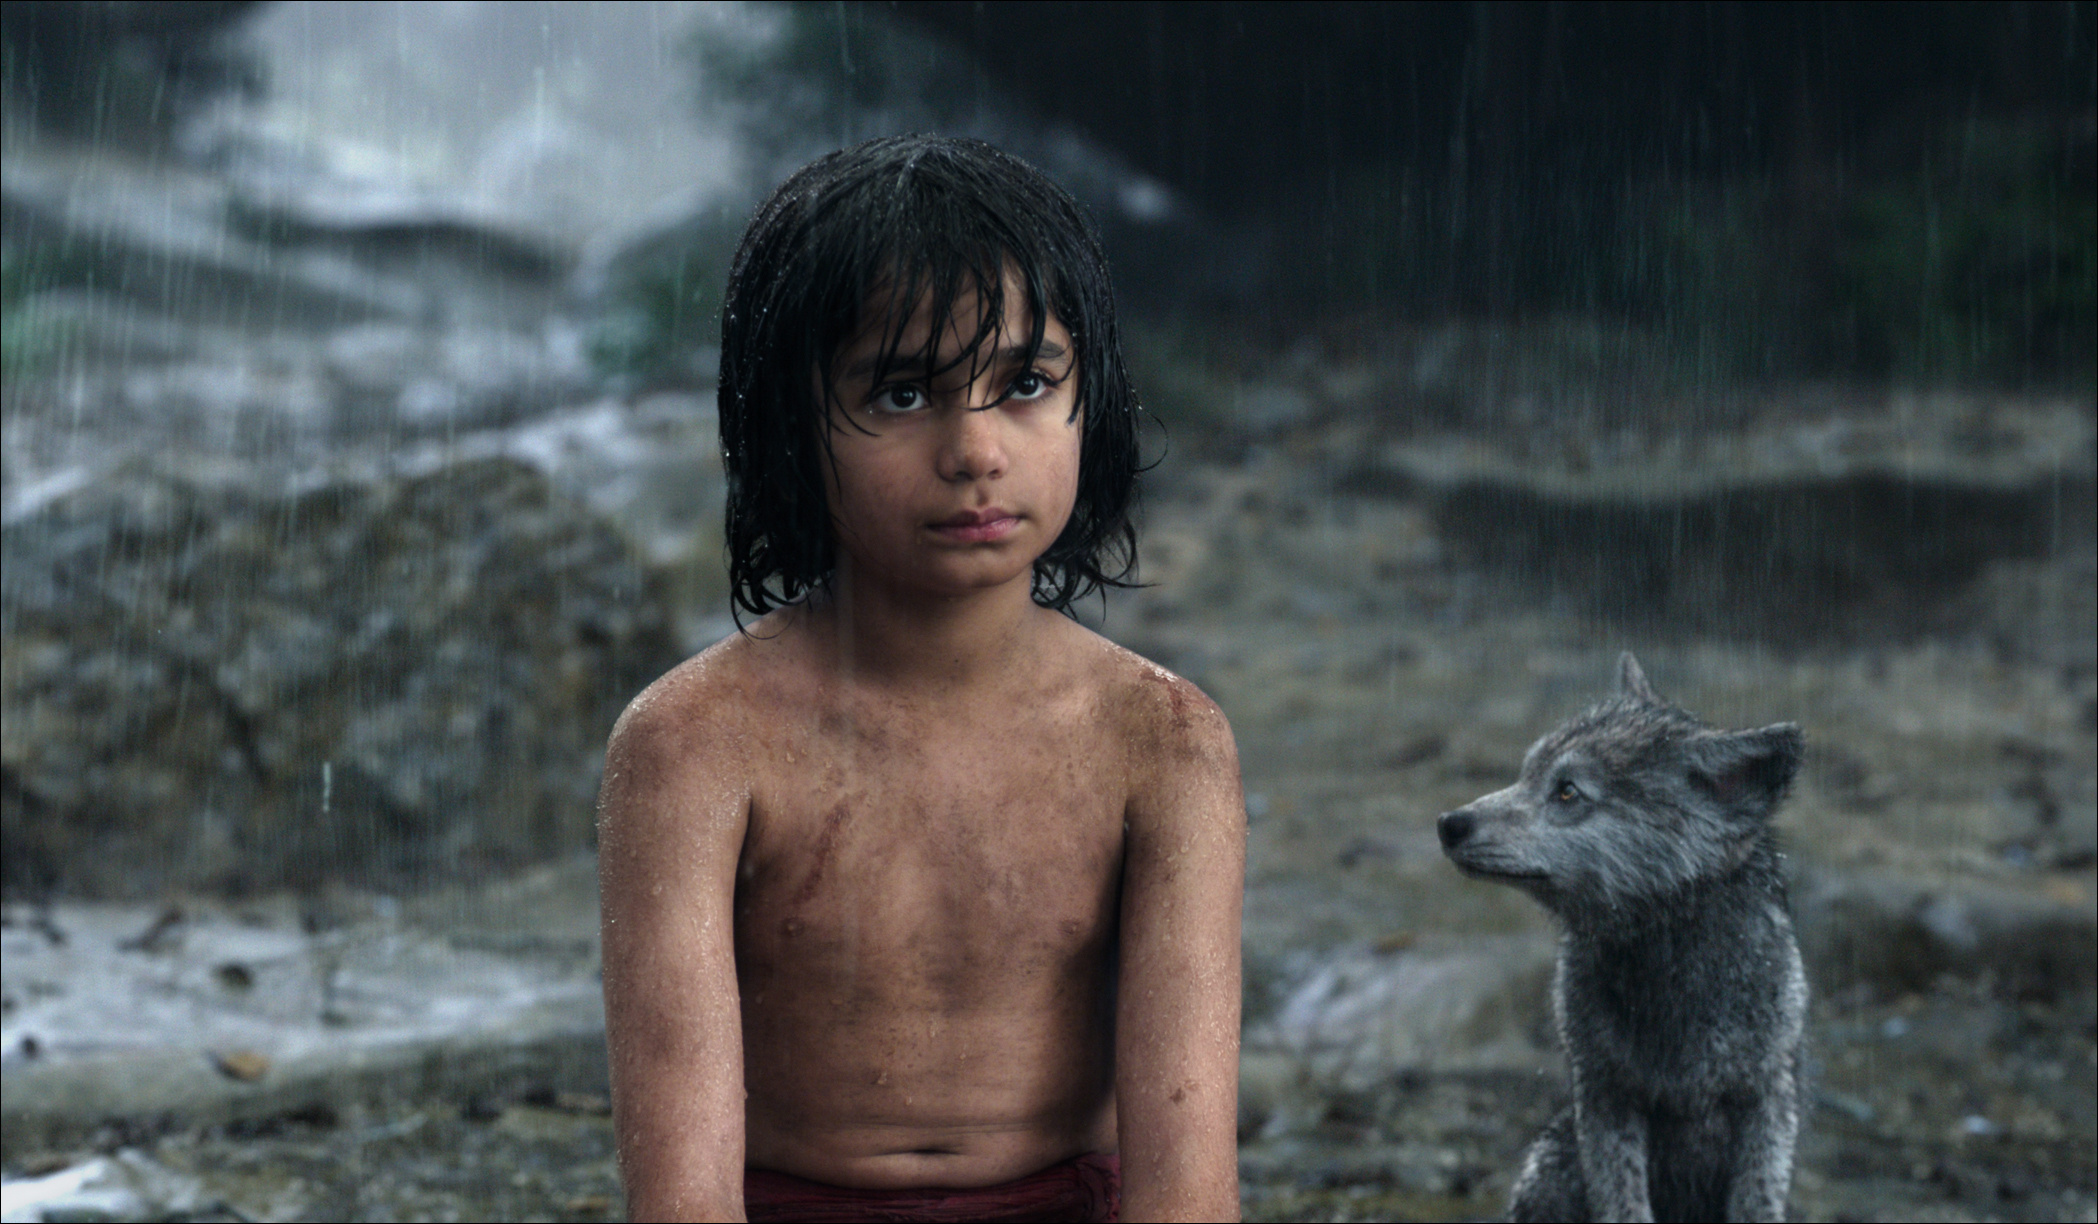 The Jungle Book (Movie), Movie wallpaper in high resolution, Striking imagery, Visual treat, 2100x1230 HD Desktop